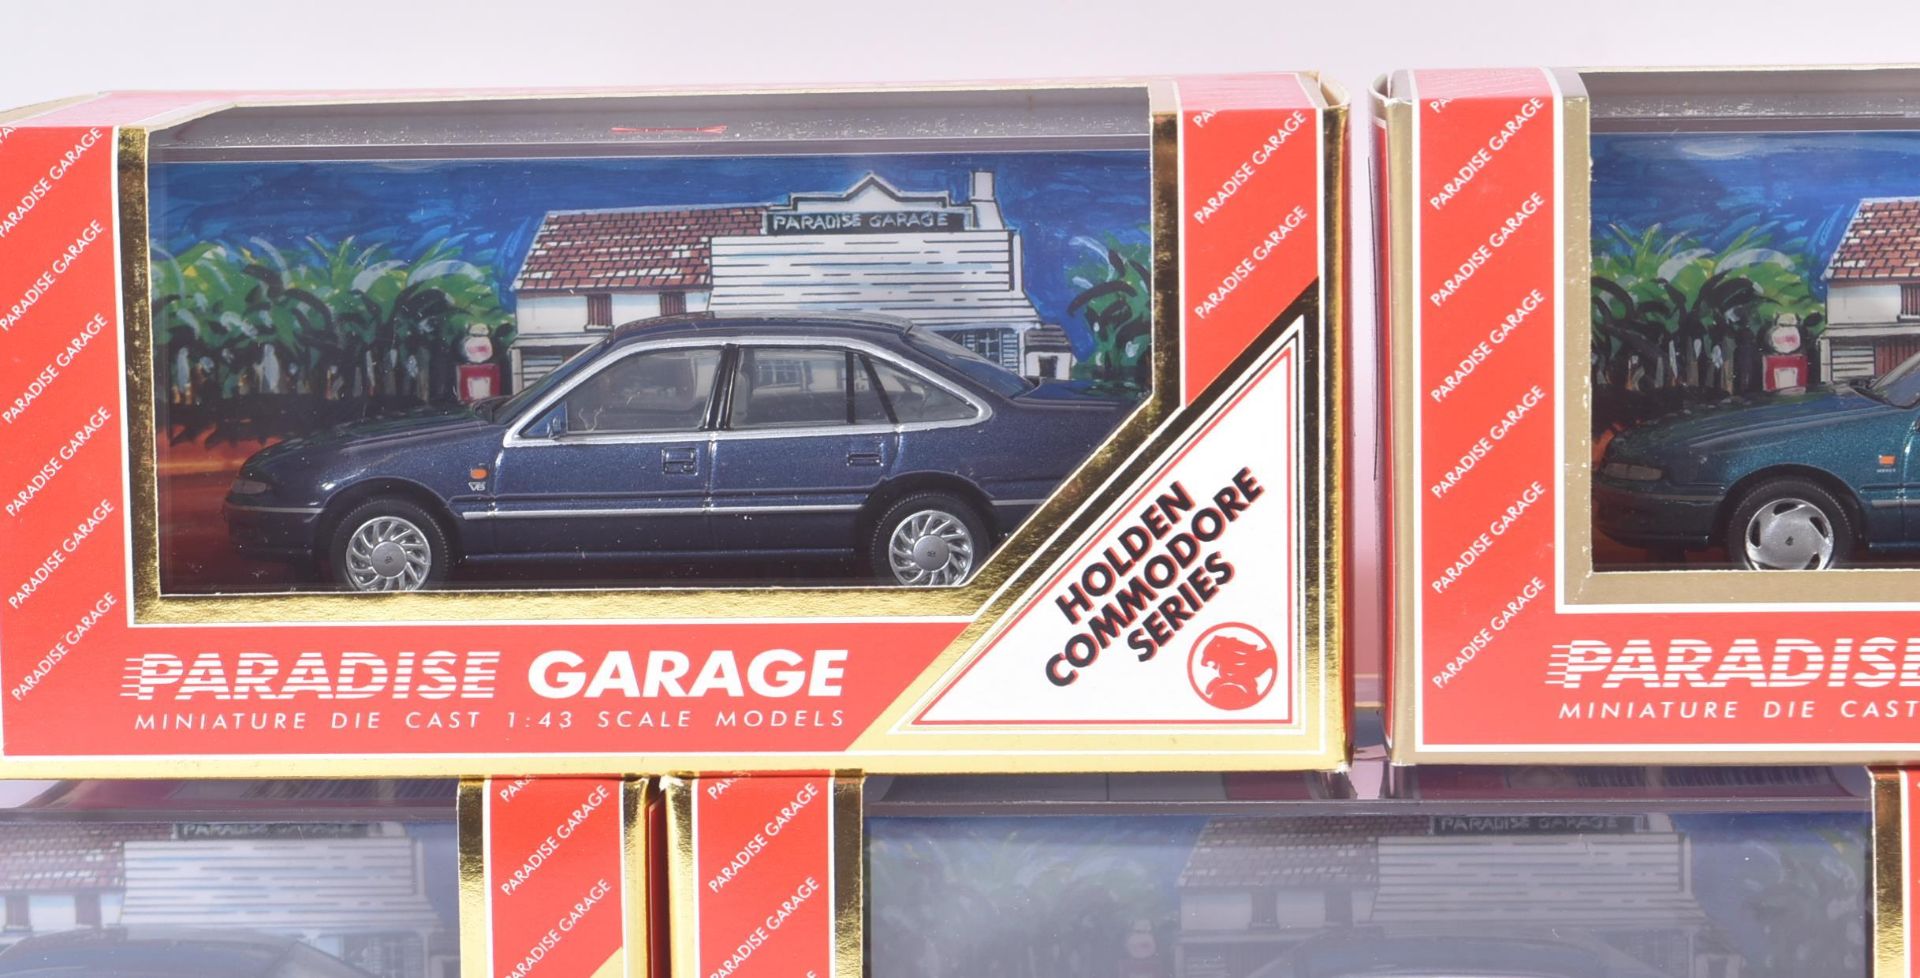 PARADISE GARAGE - 1/43 SCALE PRECISION DIECAST MODELS - Image 4 of 5